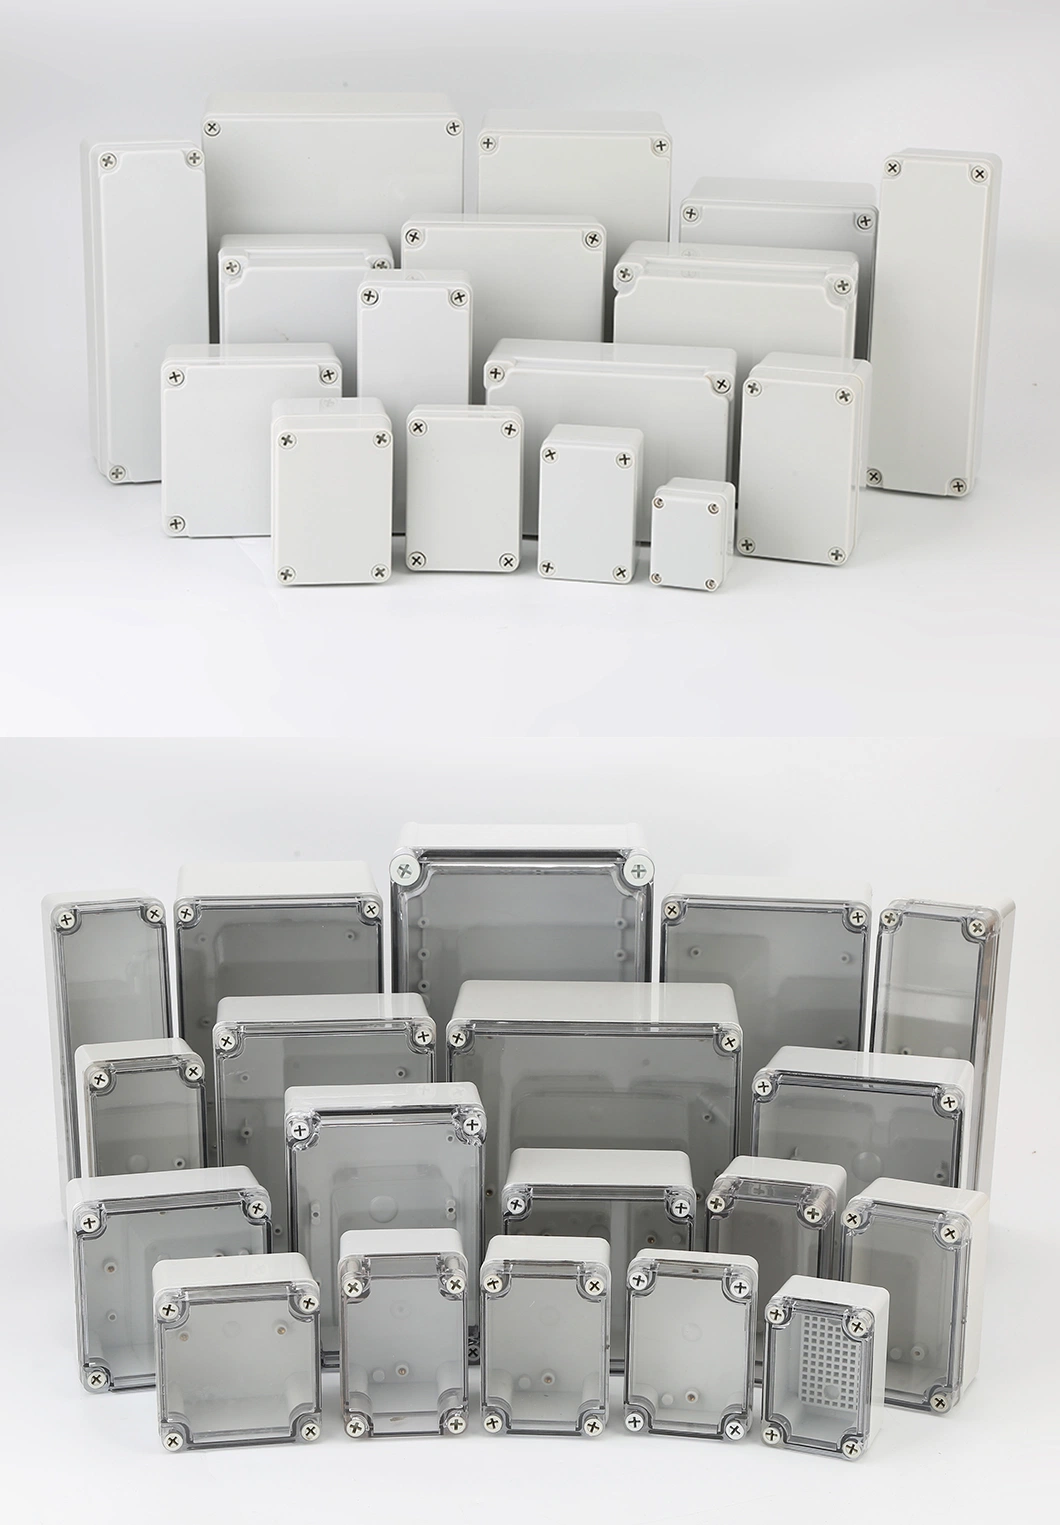 Outdoor Waterproof Case Enclosure Plastic Box Electronic Project Case Waterproof Junction Box for Electronics 130*80*85mm